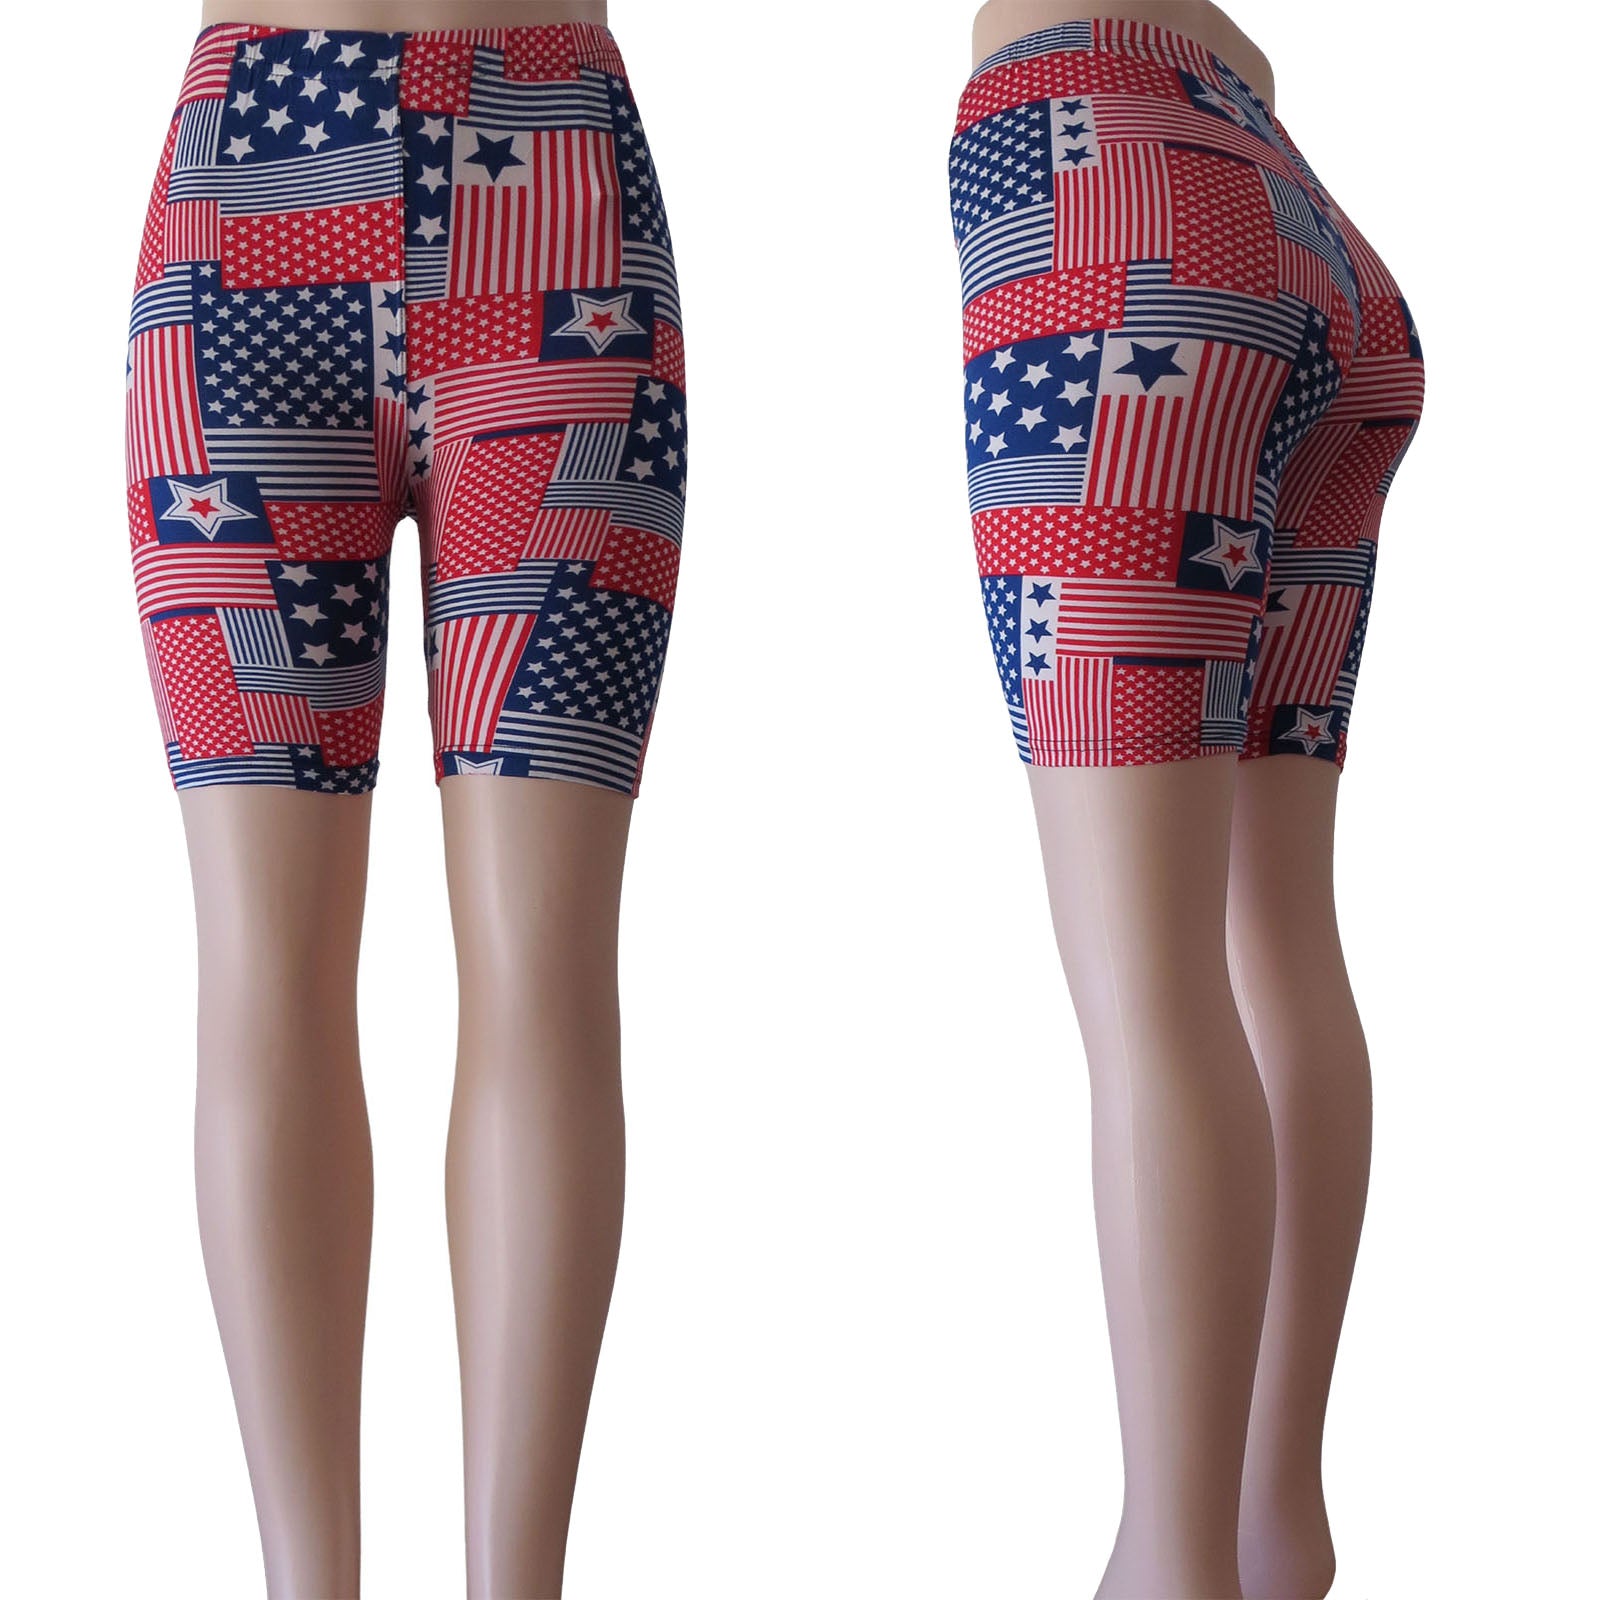 bike shorts for women wholesale red white and blue flag inspired prints